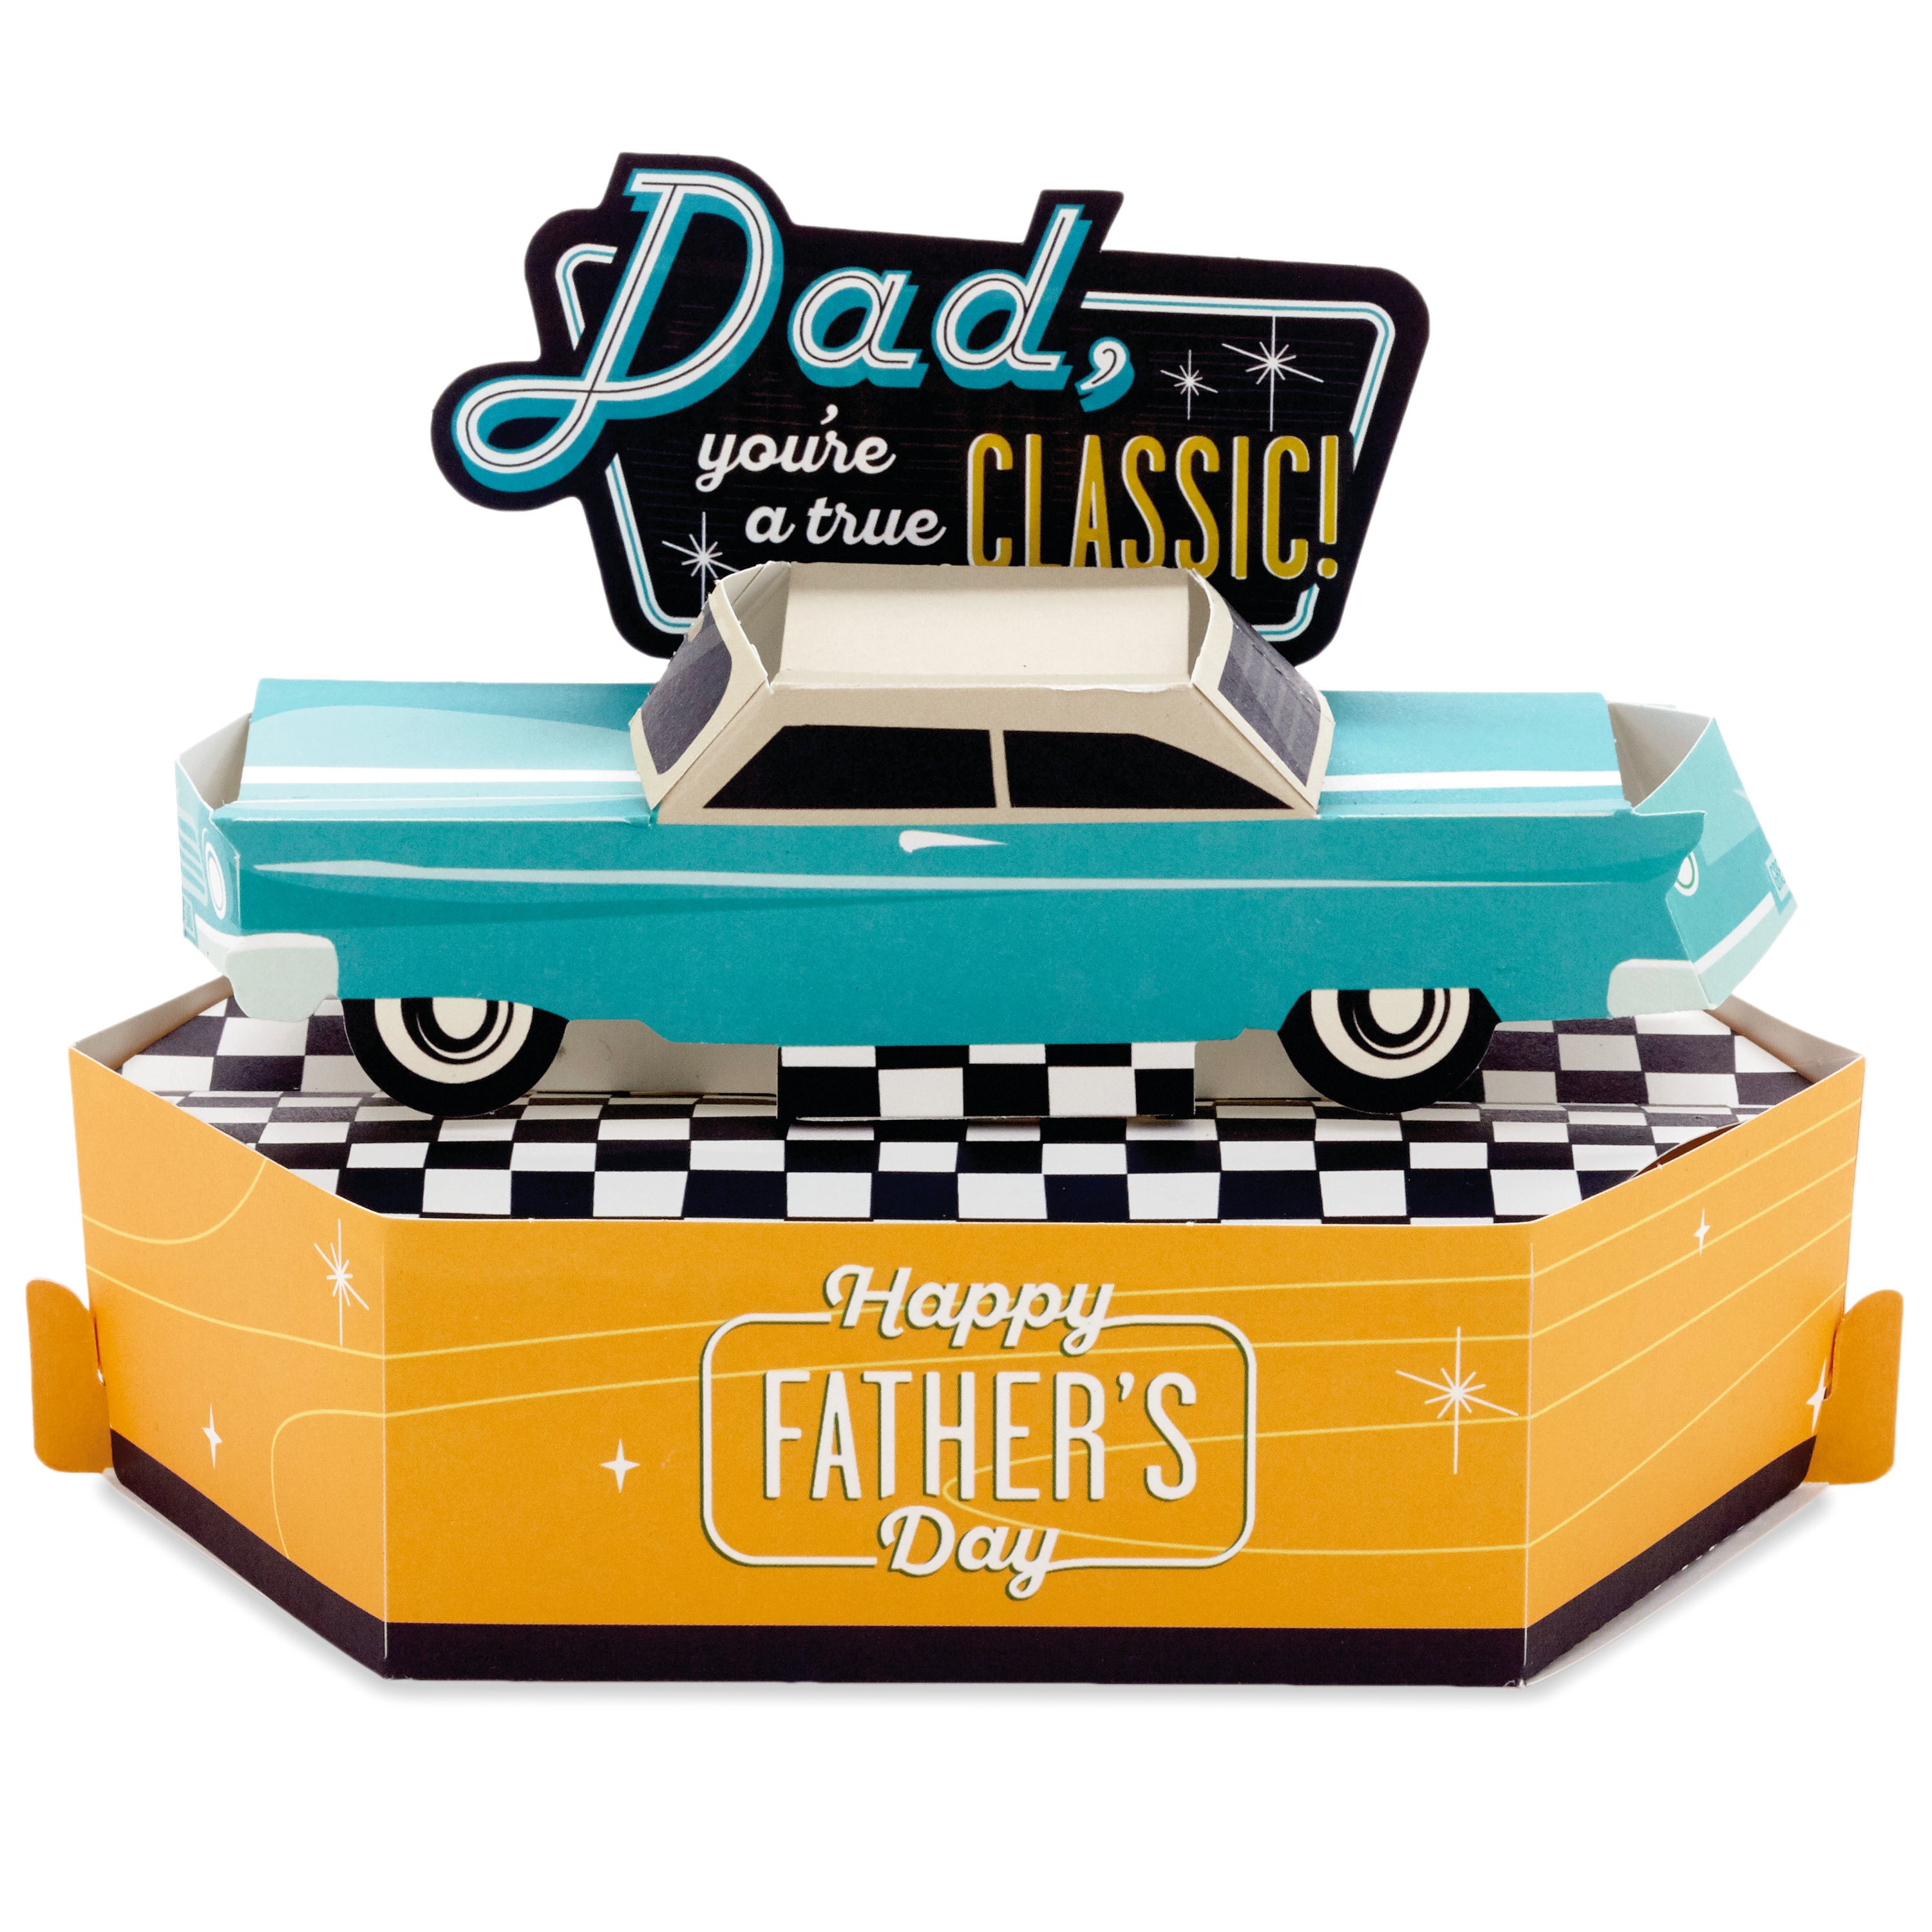 Paper Wonder Displayable Pop Up Fathers Day Card for Dad (Classic Car)